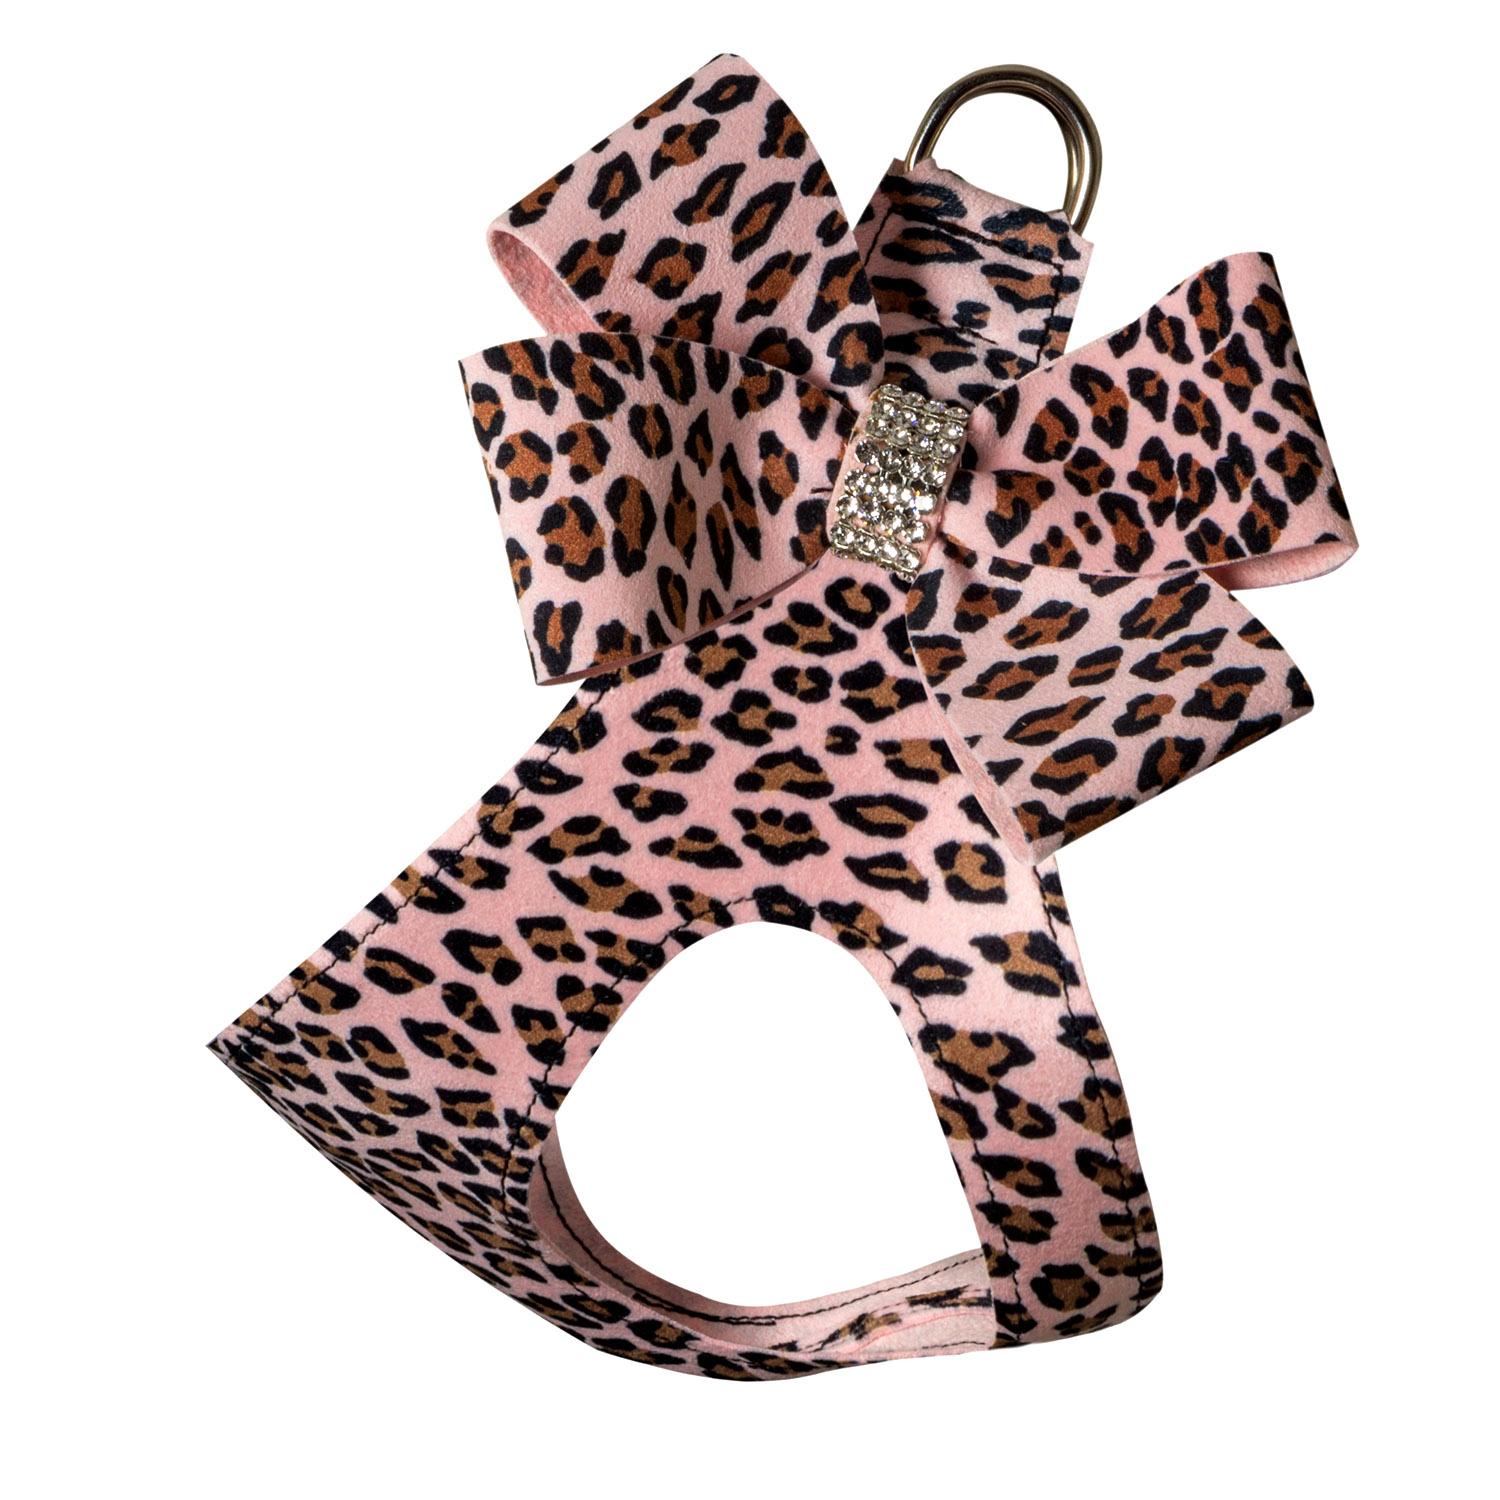 Cheetah Couture Nouveau Bow Step-In Dog Harness by Susan Lanci - Pink Cheetah